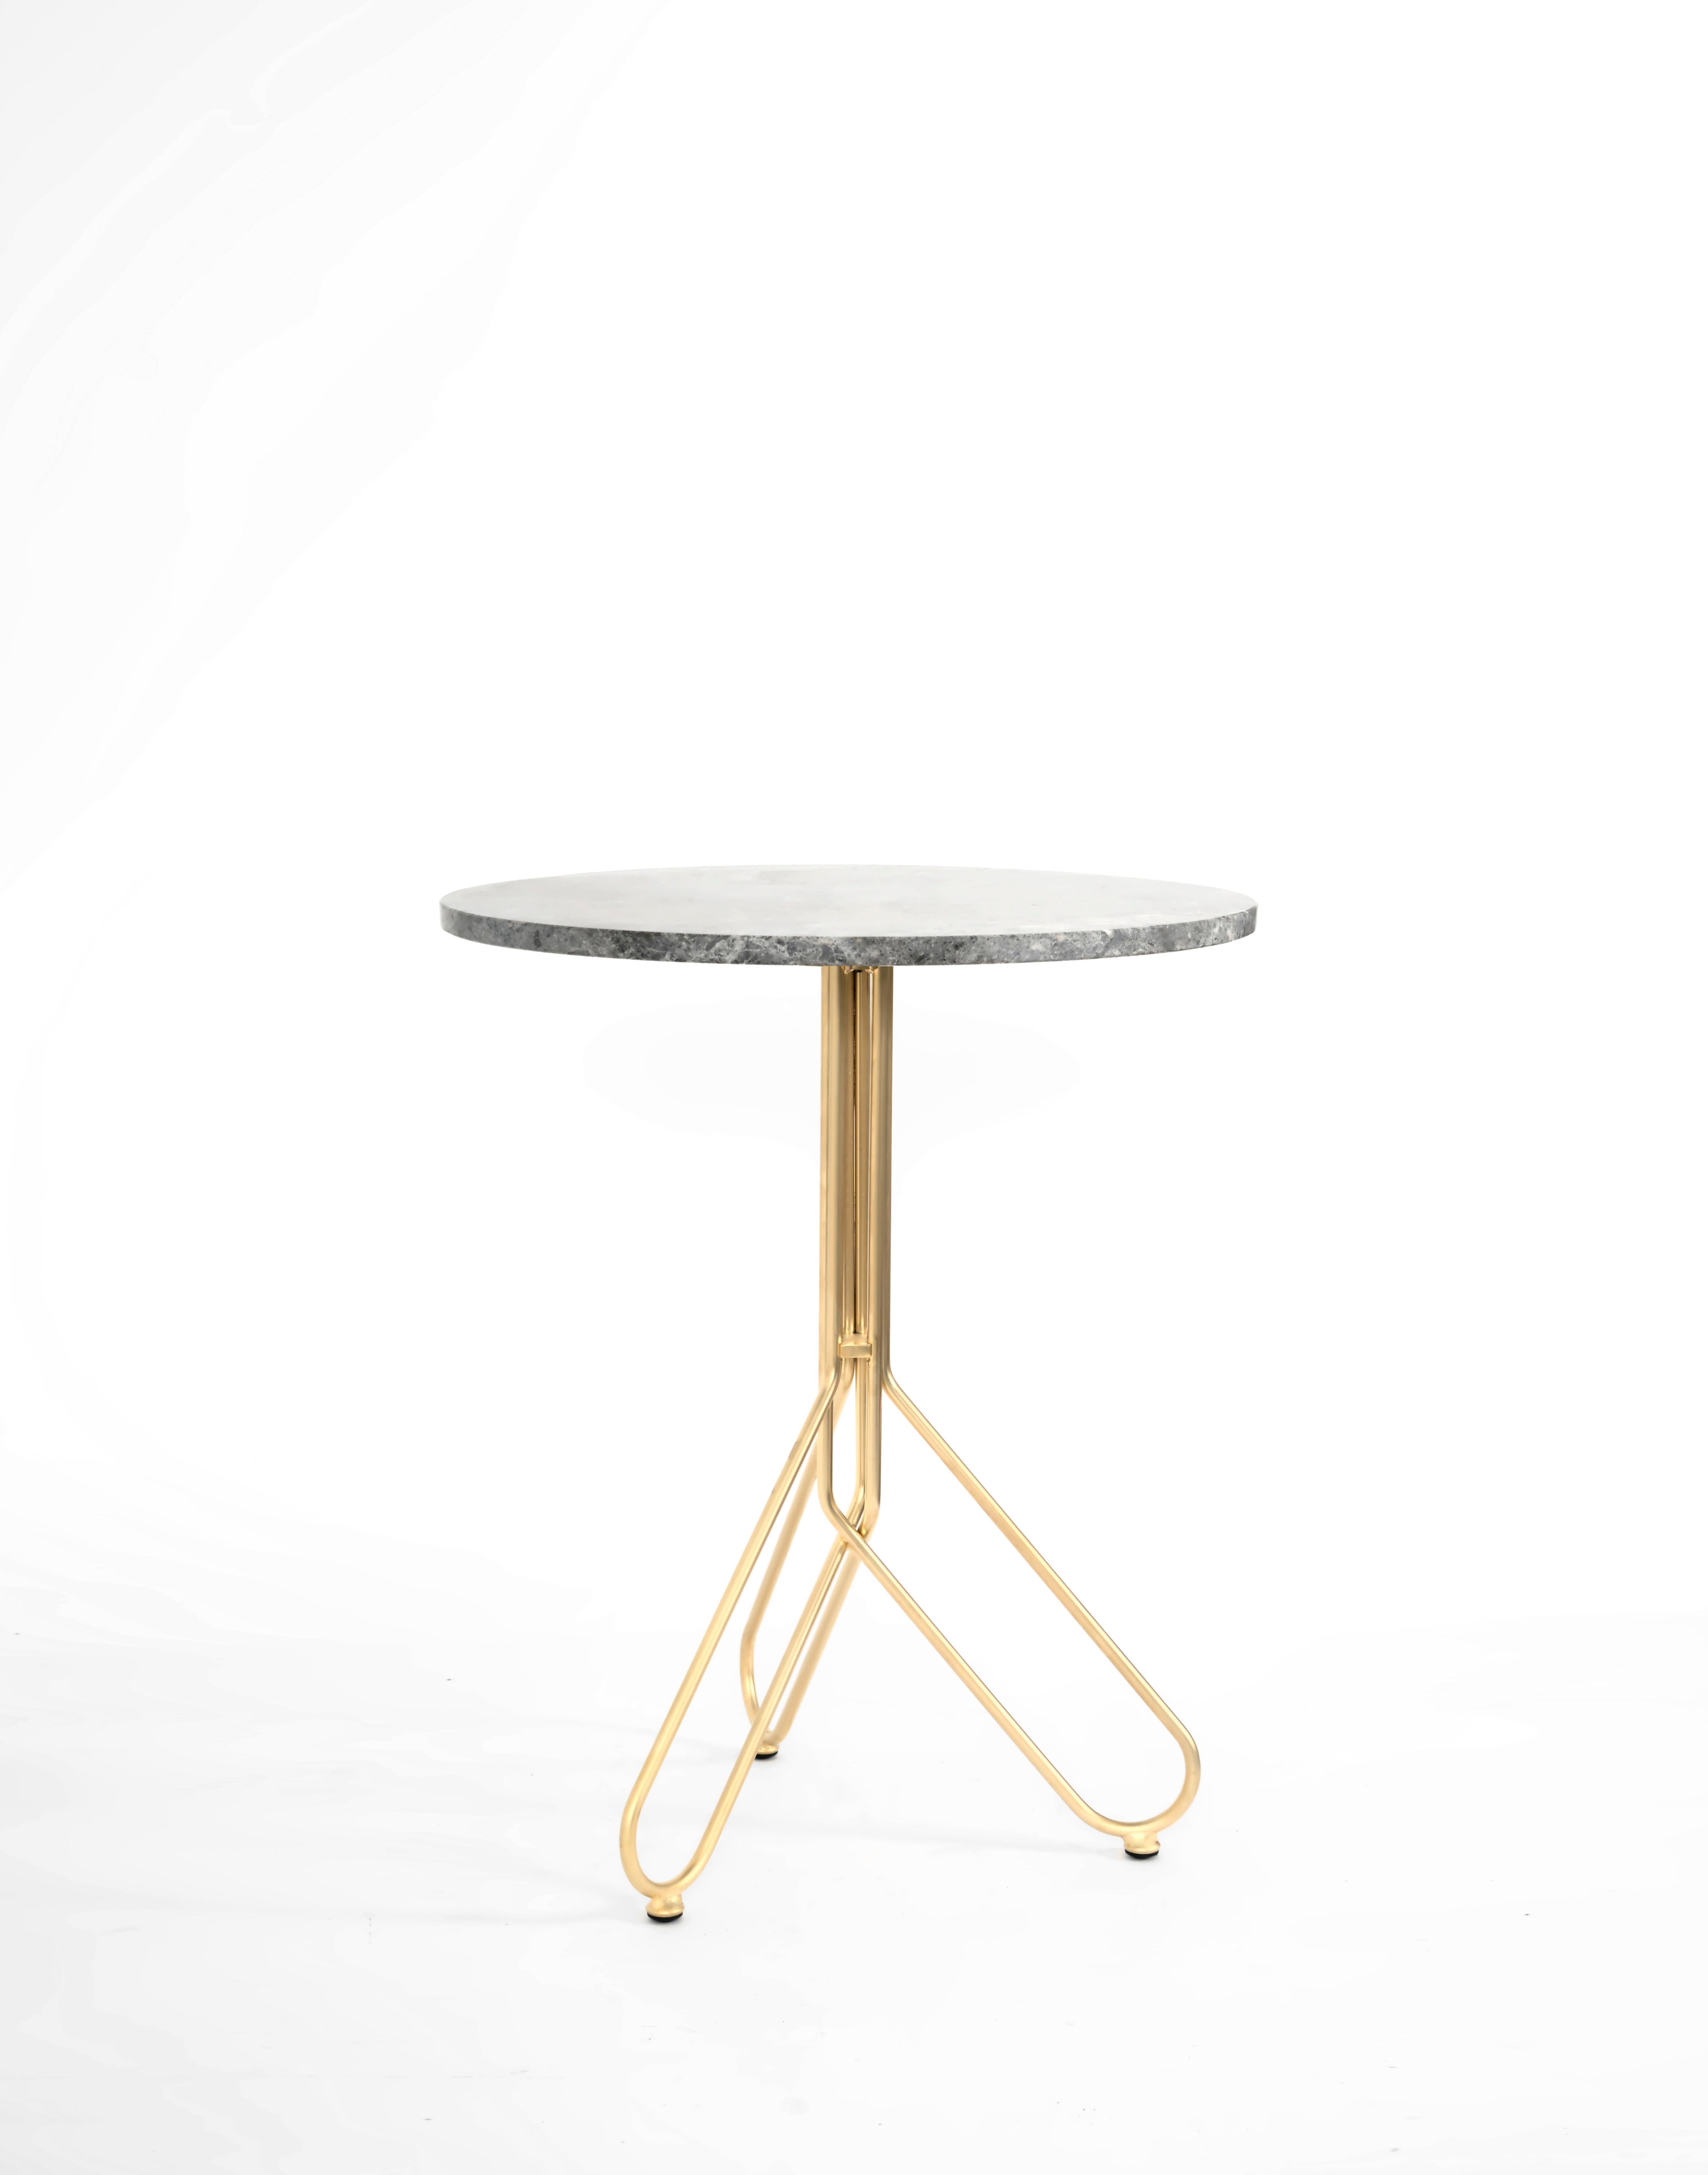 The design of the Cota table is characterized by a composition in the space of intersections. Each leg develops in a path that descends from the top and once the support on the ground is created it returns to it.
The intersection of the three legs